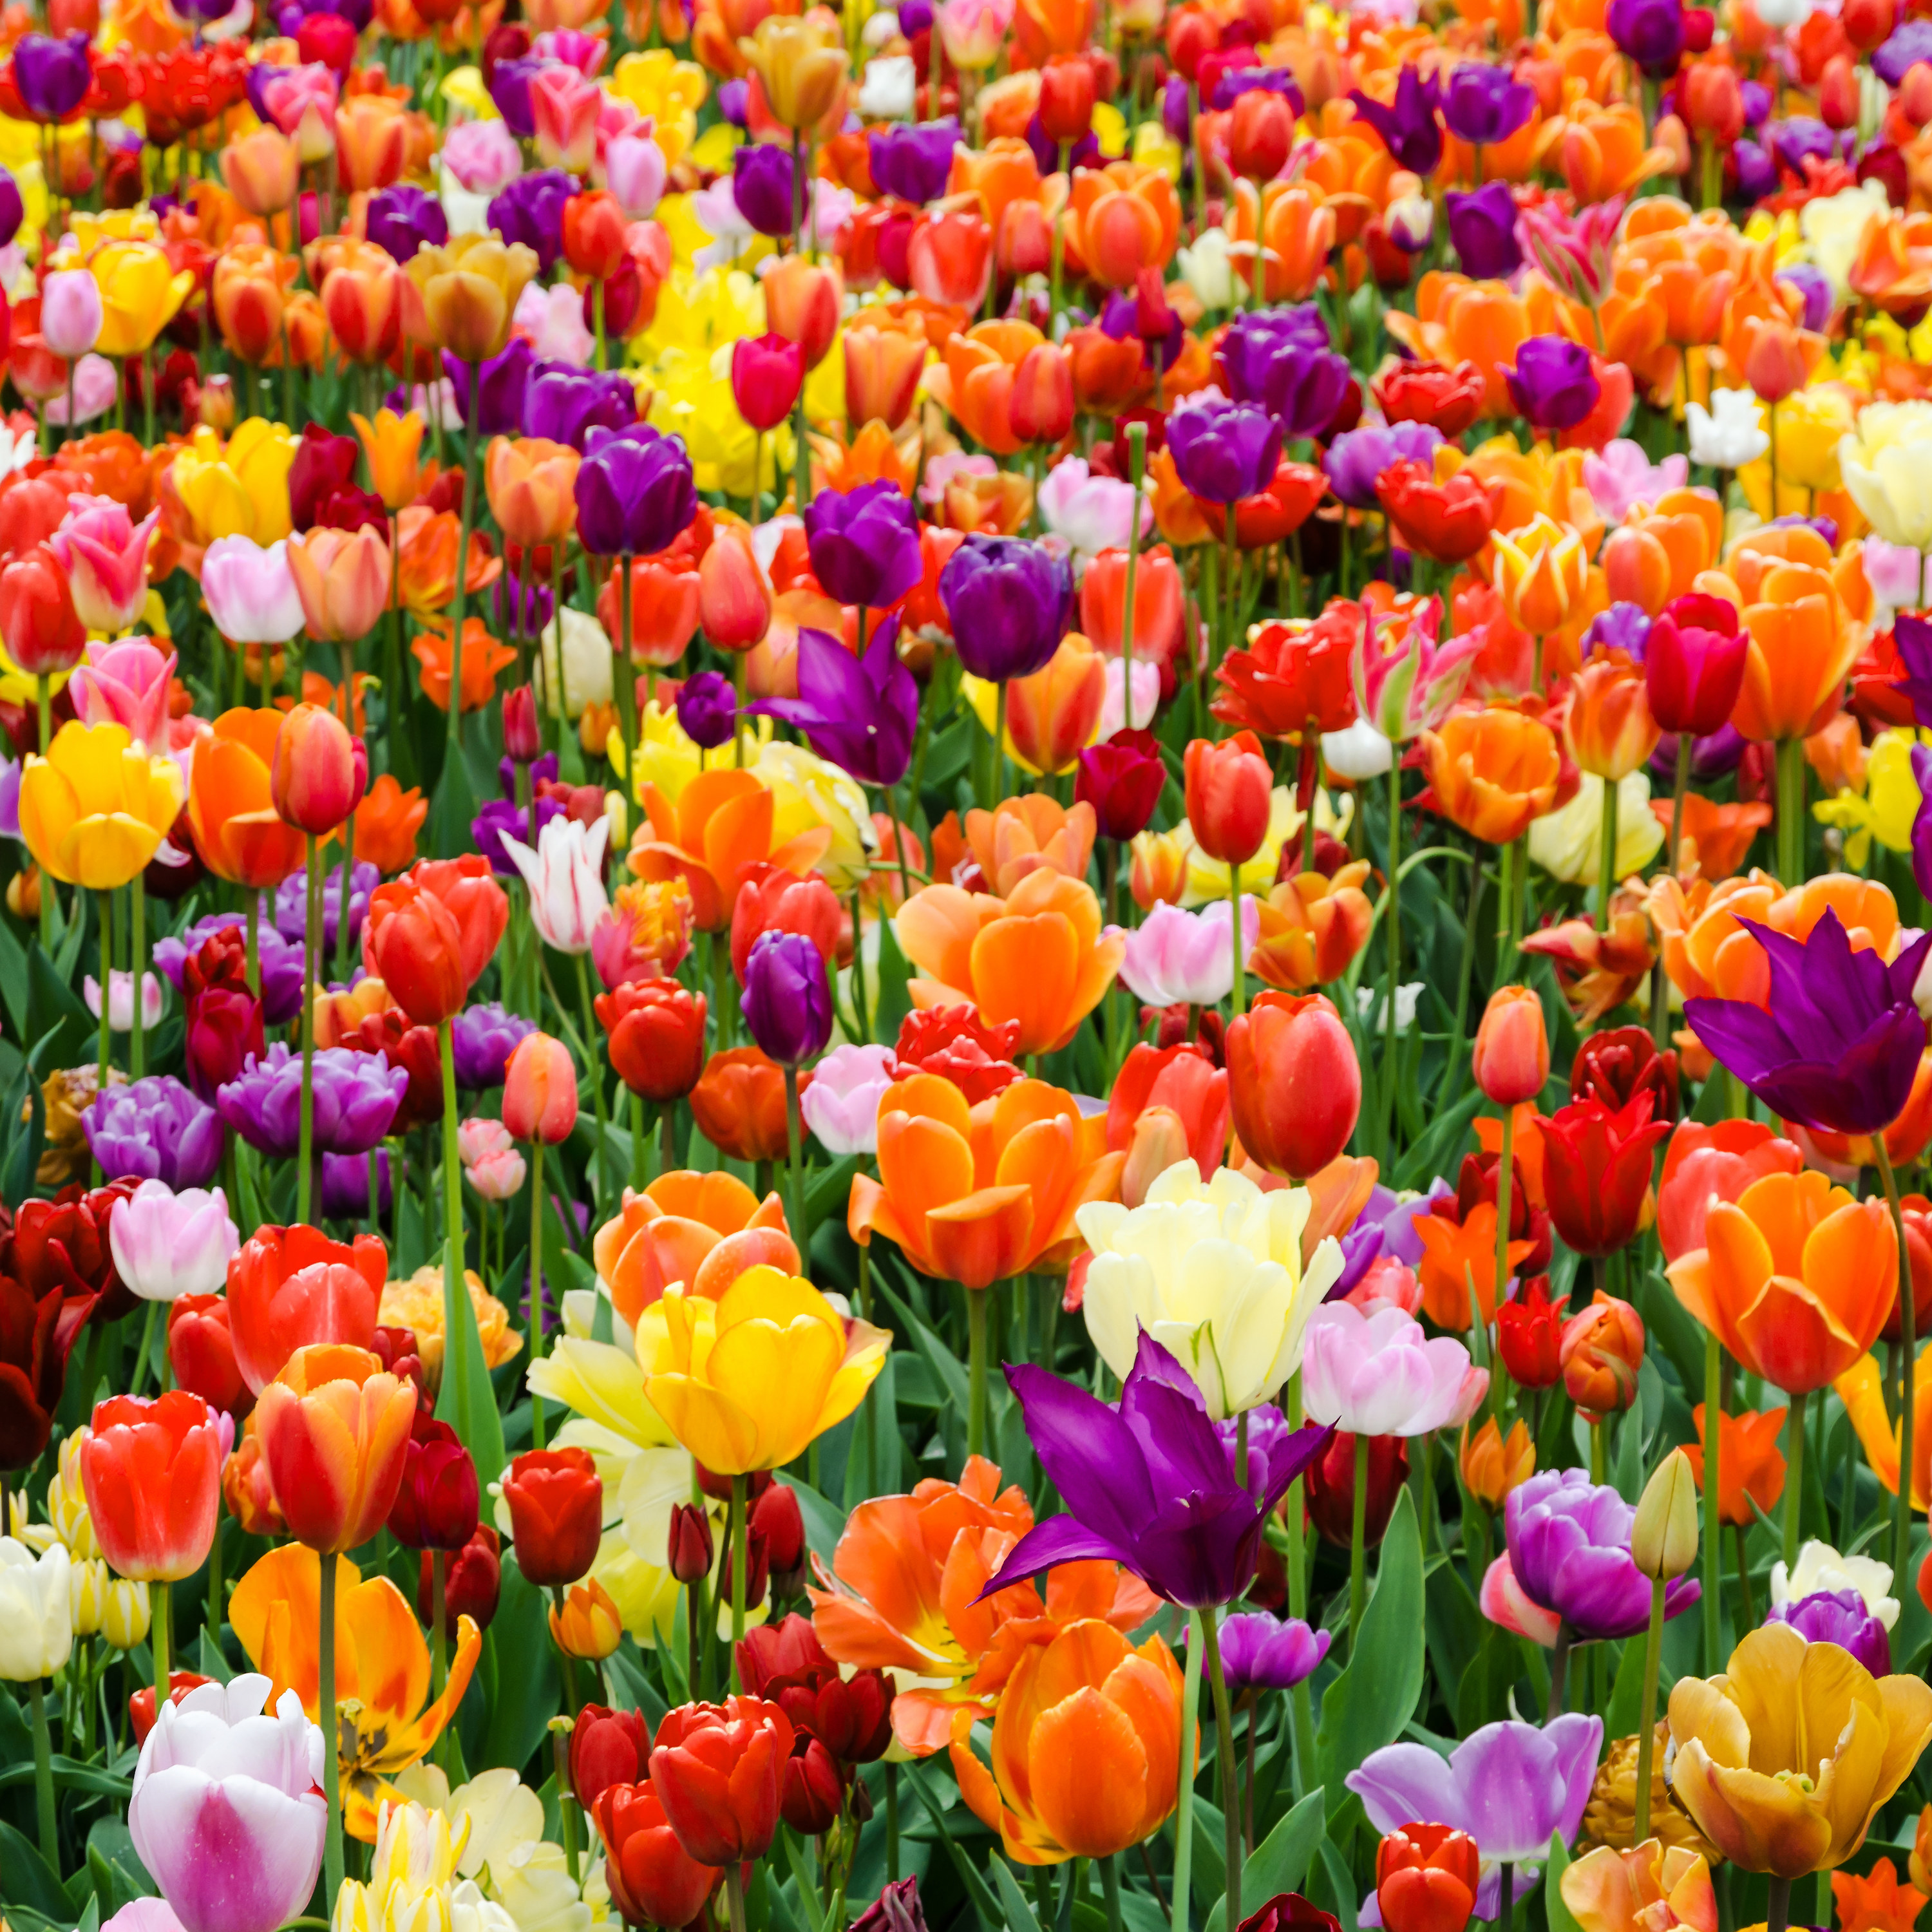 A garden of colorful tulips